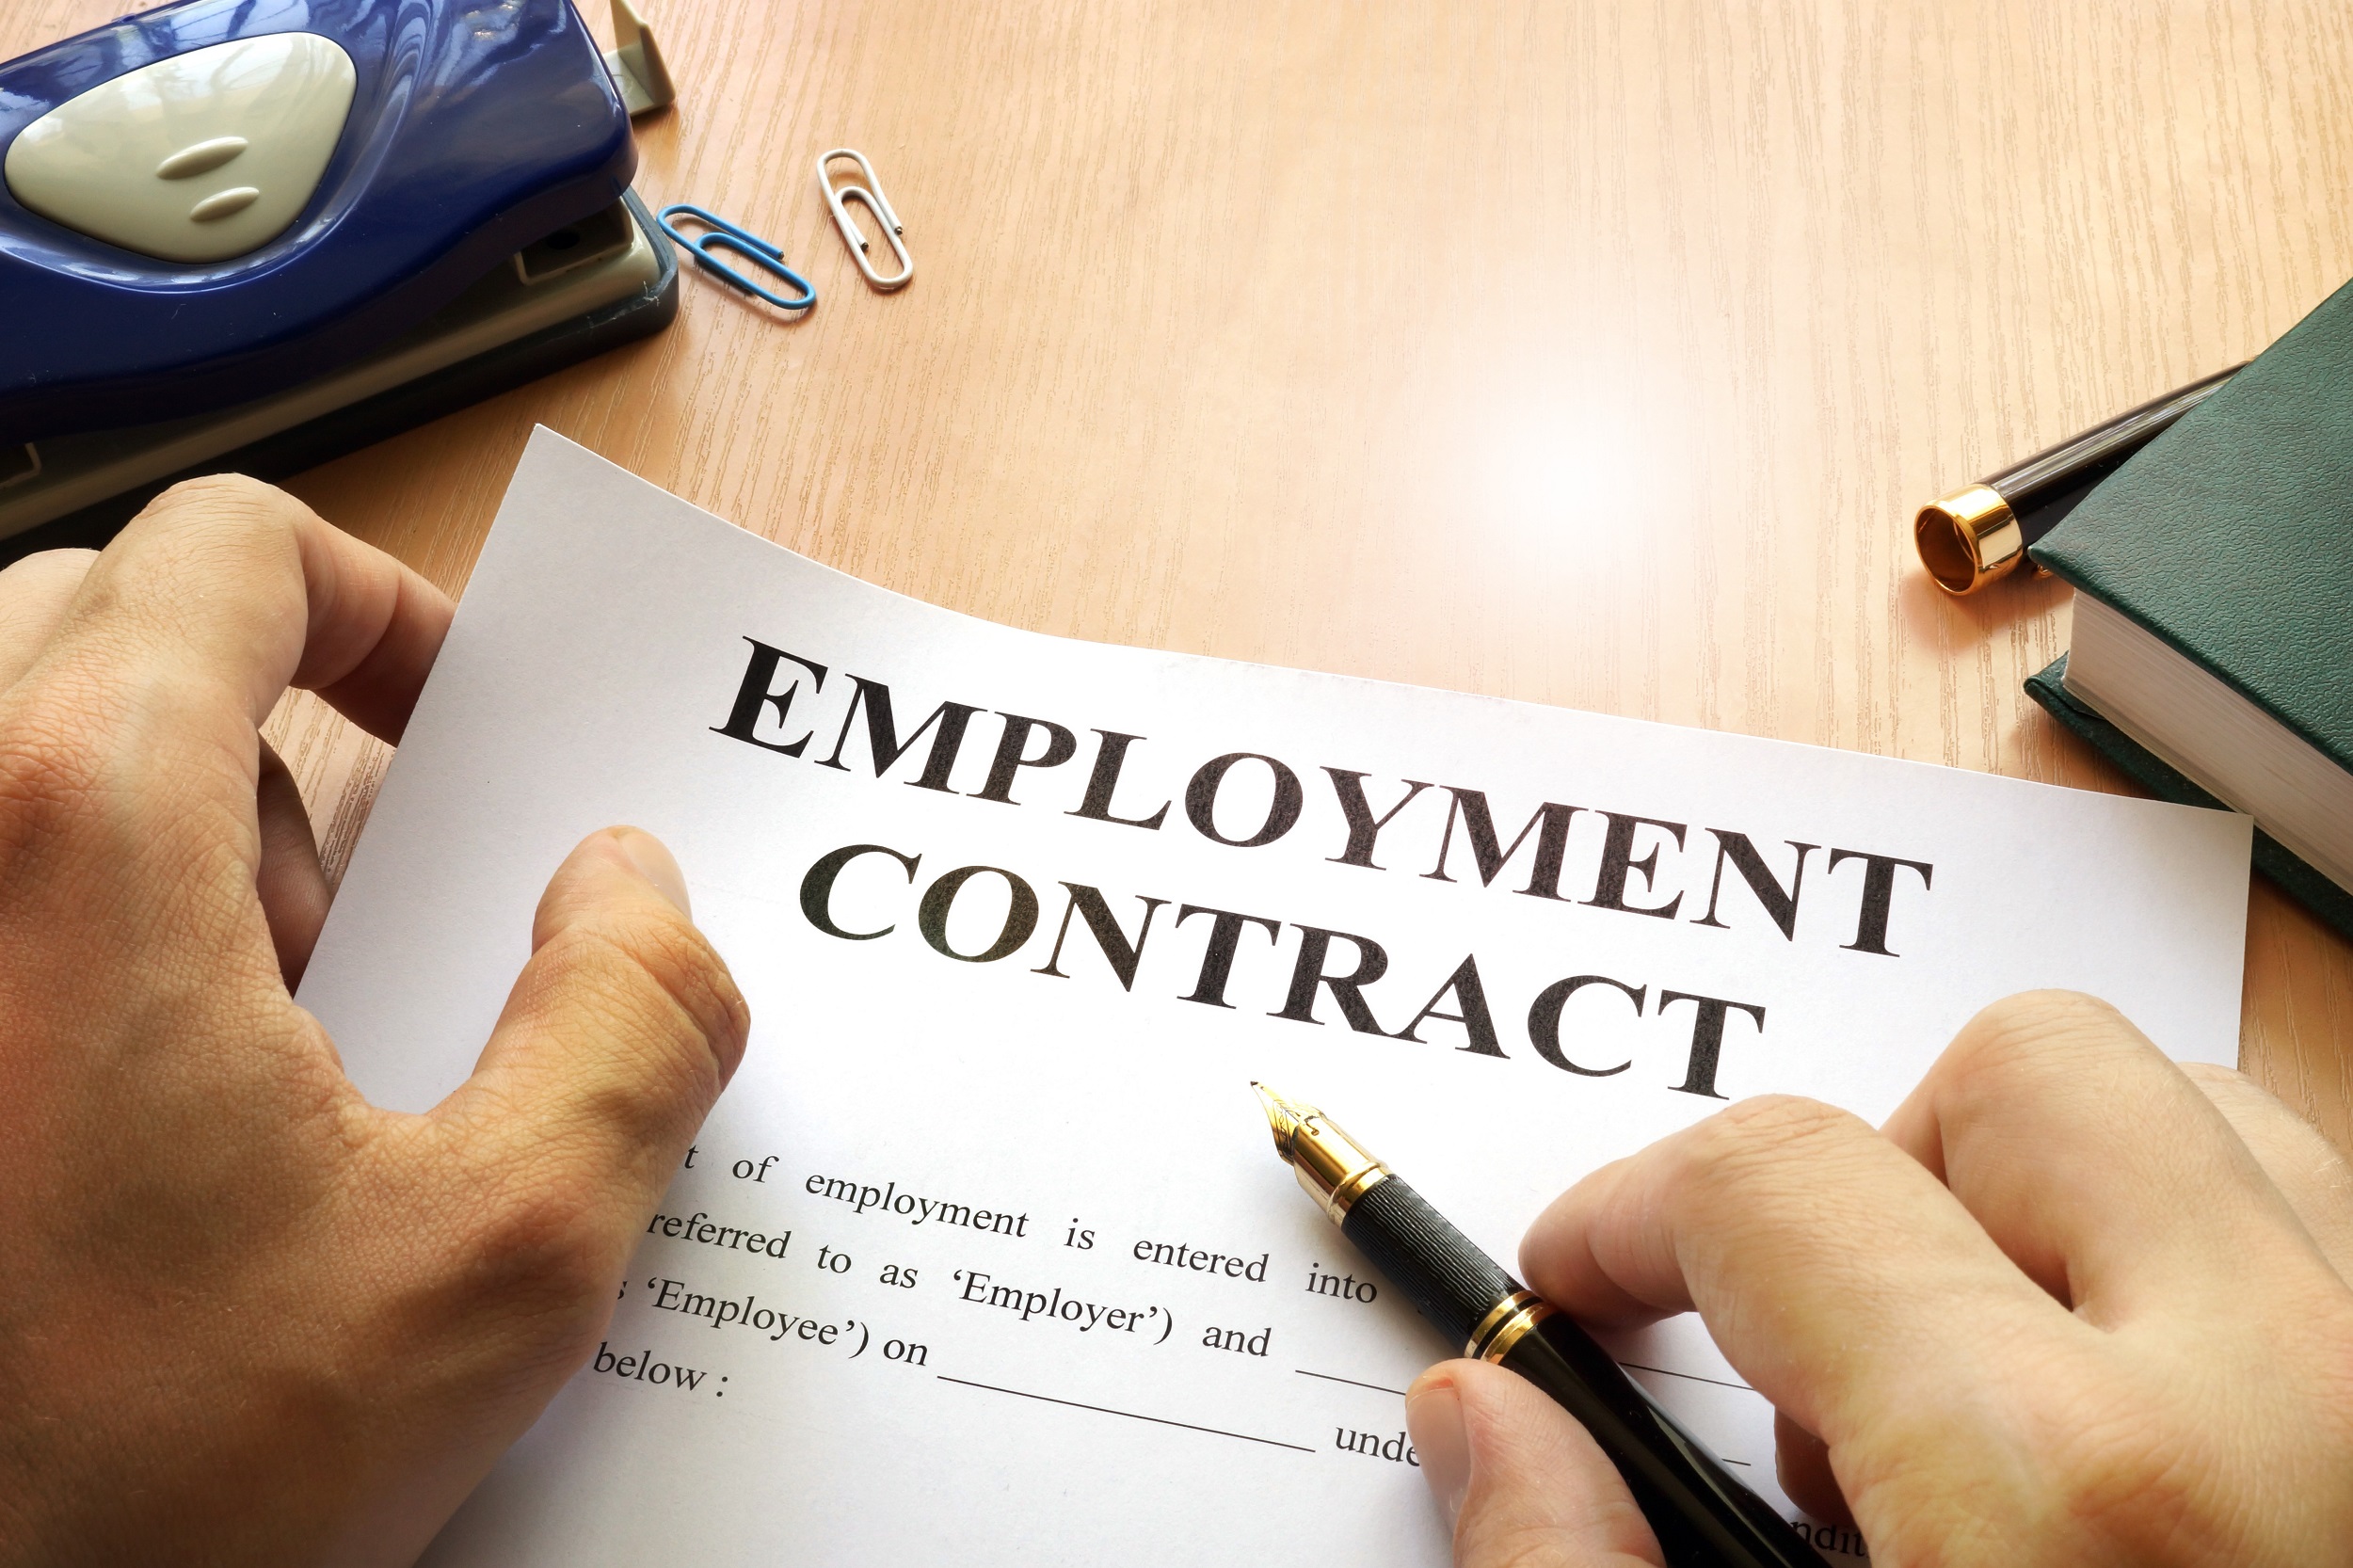 Drafting of an employment contract